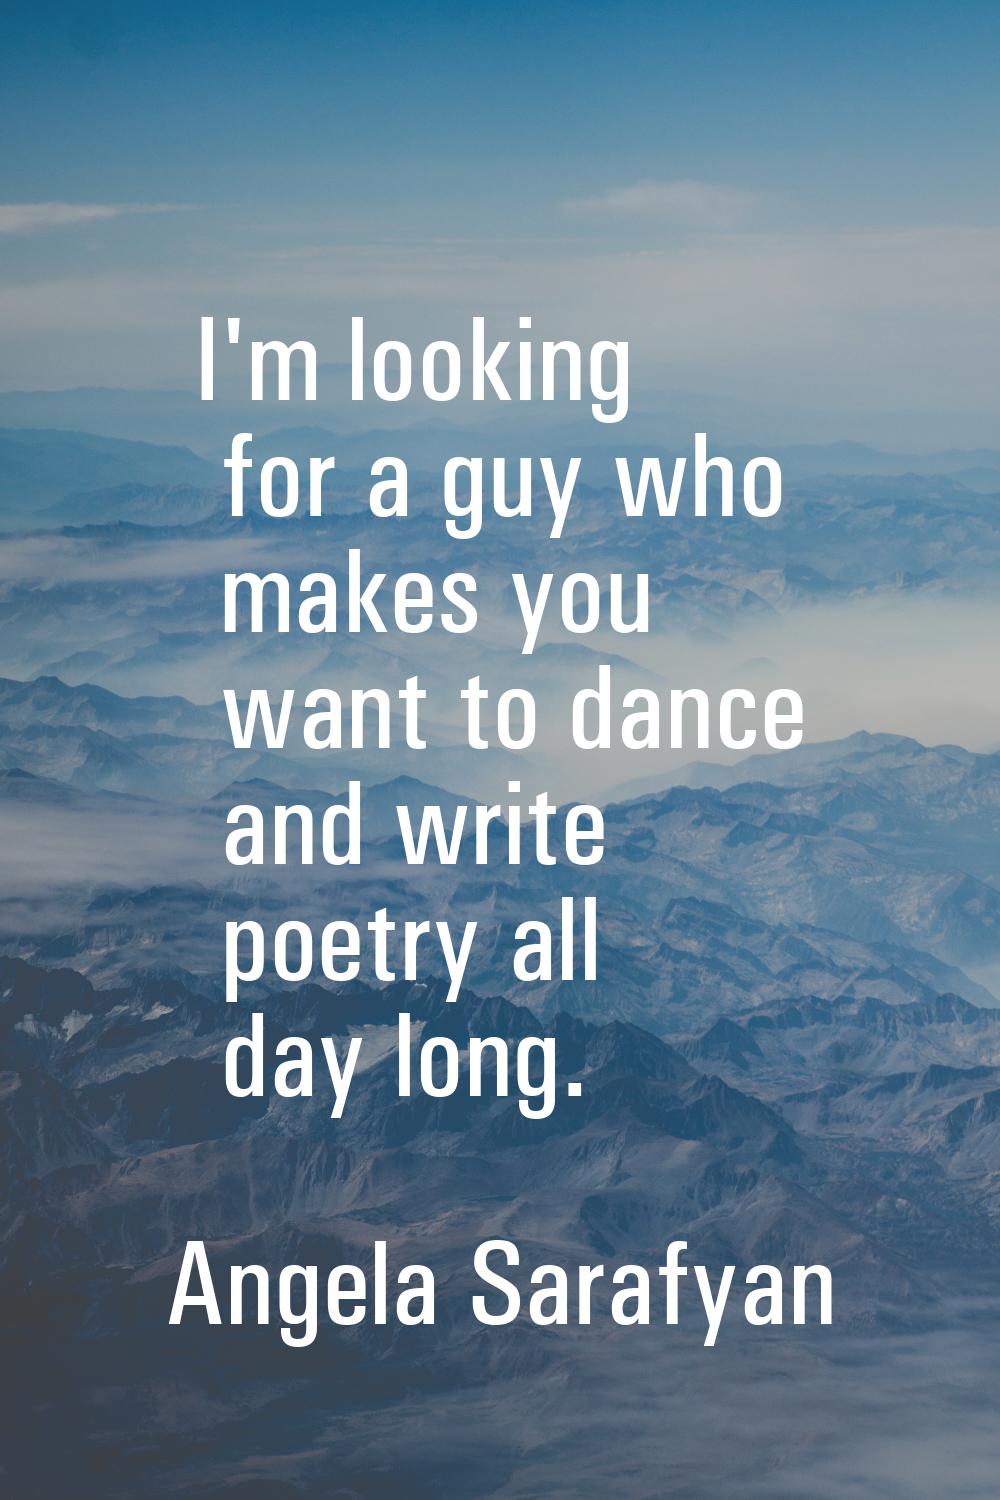 I'm looking for a guy who makes you want to dance and write poetry all day long.